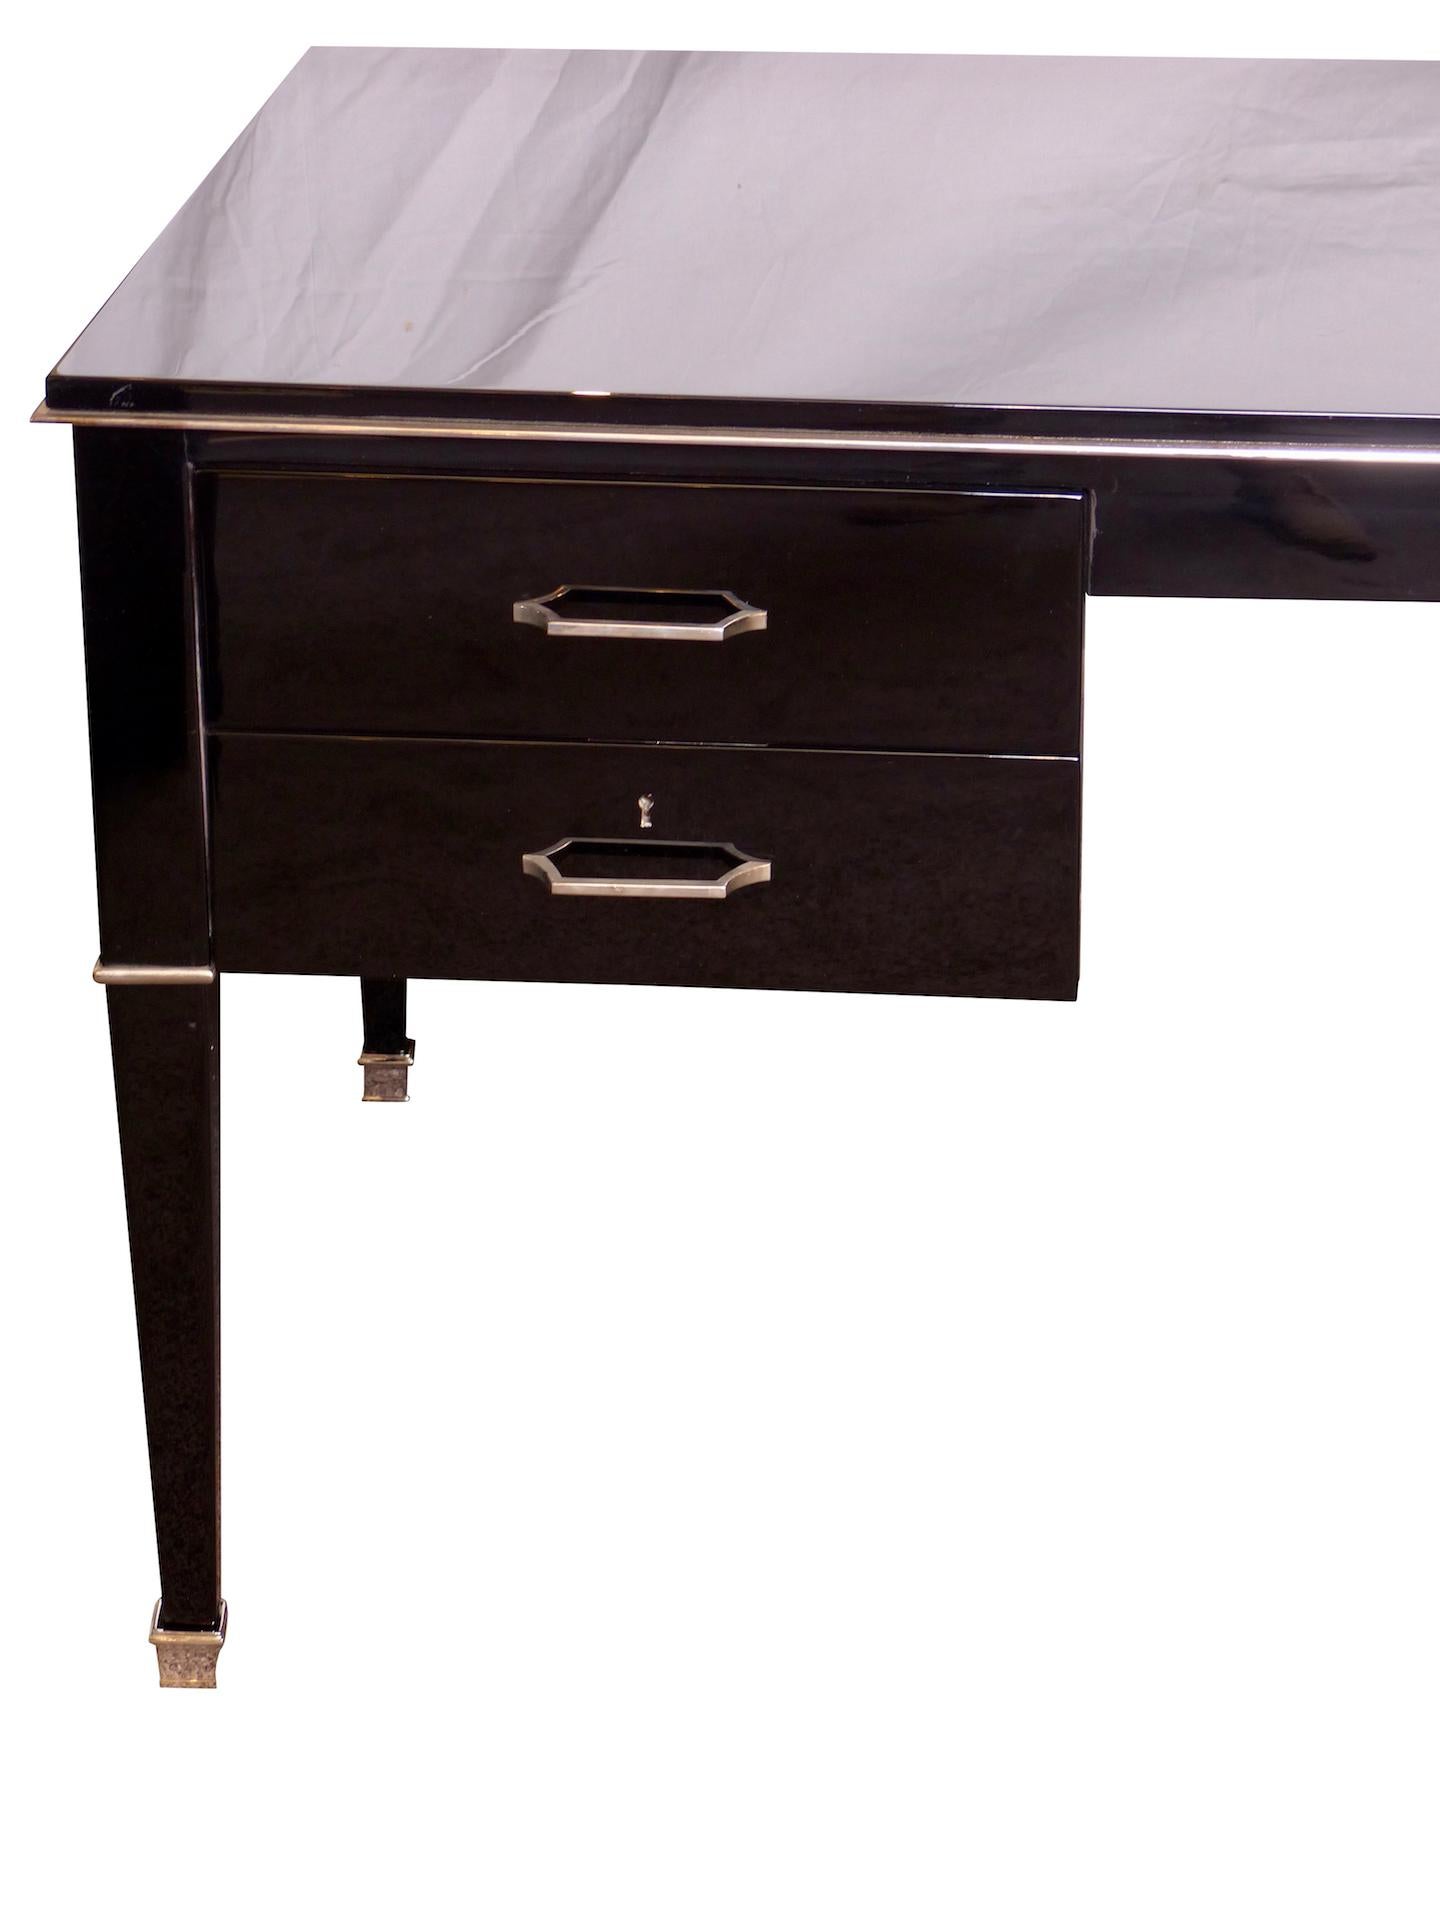 Original Belgian Art Deco desk by Decoene Frères.
High gloss black Piano lacquer.
Nickeled metal fittings and sabots.
All metals original.
Four drawers, two with key lock.
 